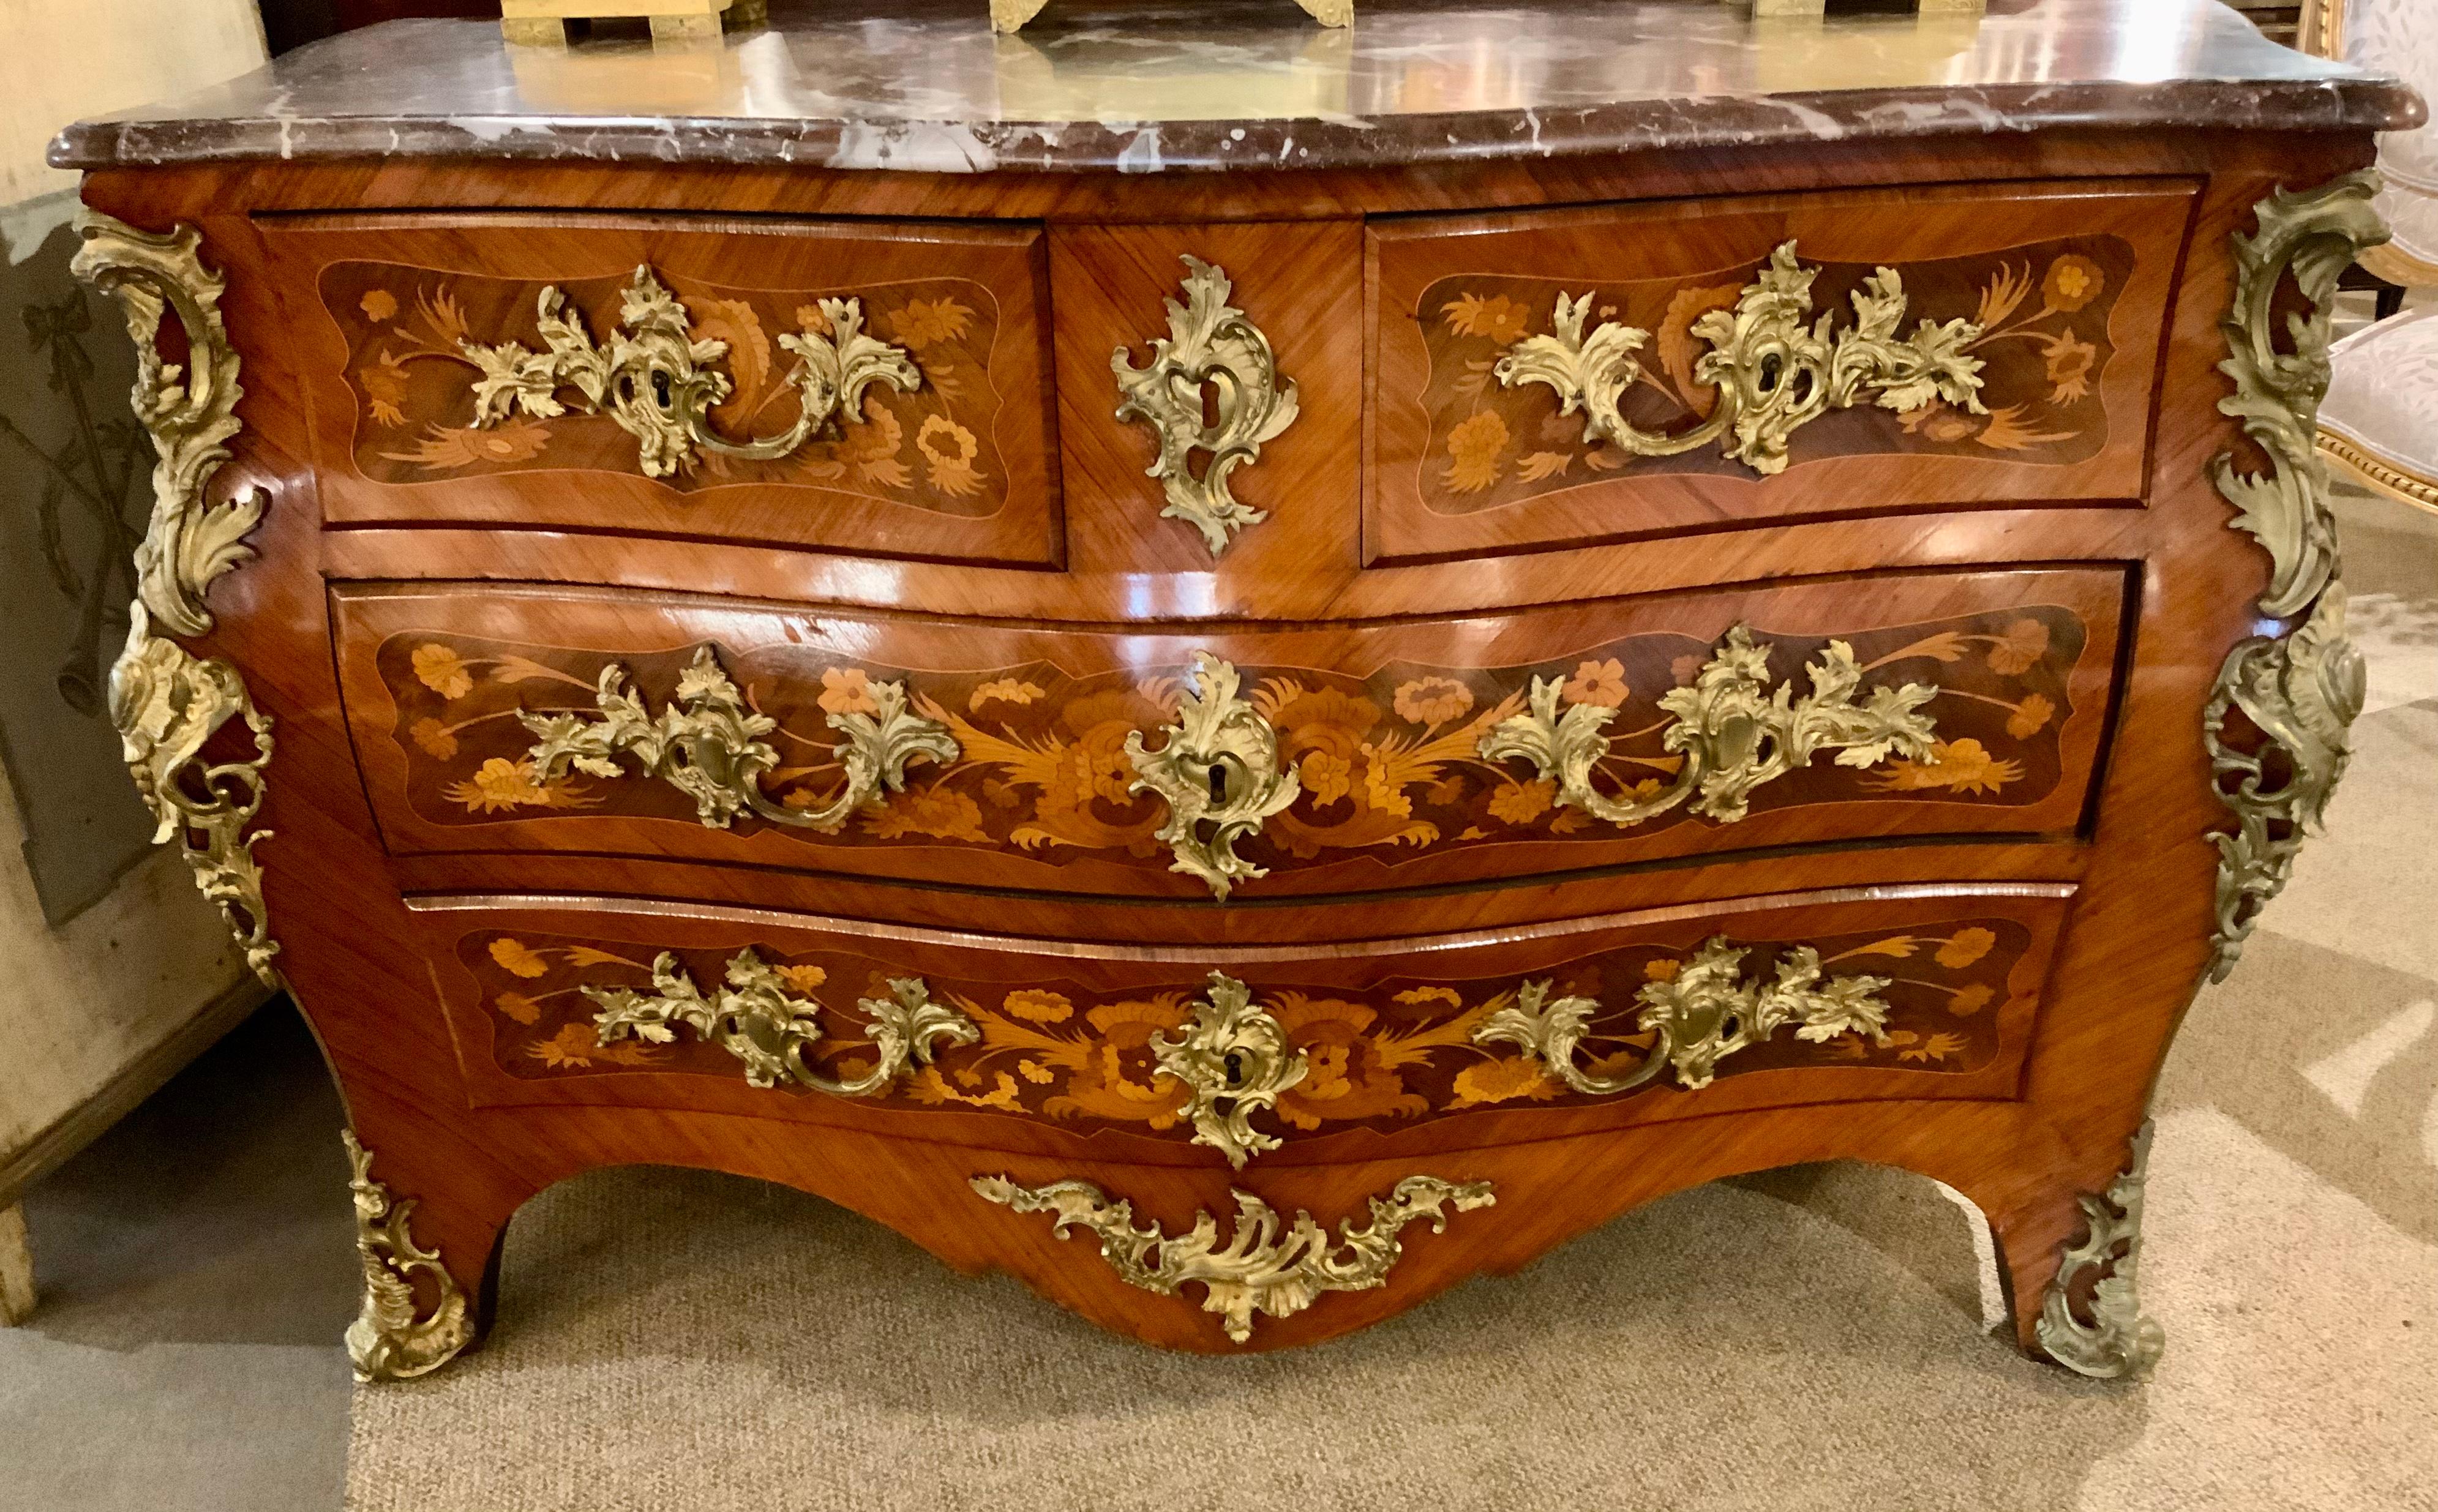 This special Regence-Style commode is early 19th century,
It is a rare and elegant piece because of the fine marquetry 
That is exhibited throughout this cabinet. The shape is in a
Bombe’ form and the front has a serpentine shaped marble.
The